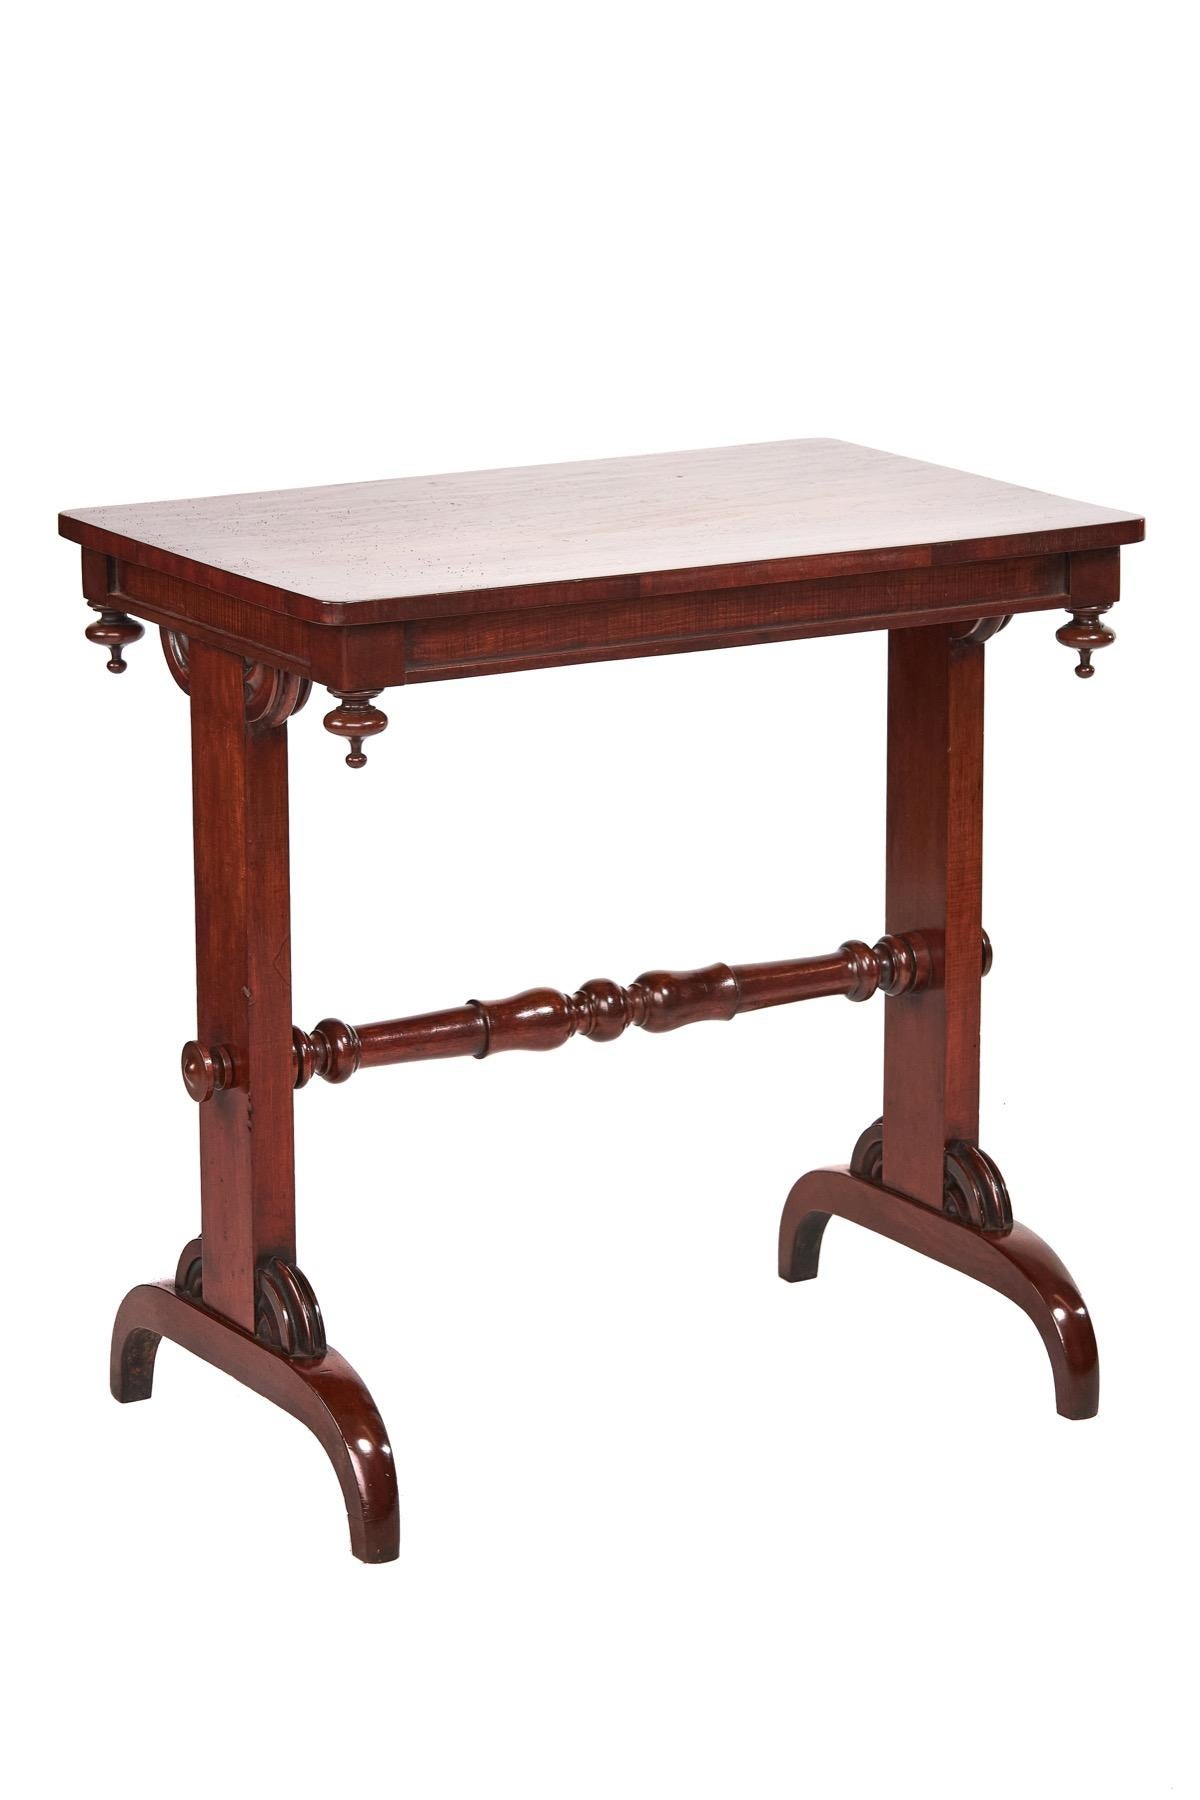 W1V Period Mahogany End Support Table,
Plain Mahogany top,
Inset Frieze with 4 turned finials, 
End Supports with carved mounts, 
Turned Mahogany Cross Stretcher, 
Sitting on Arch Shaped Legs
Recently Polished
Good Quality Timber

